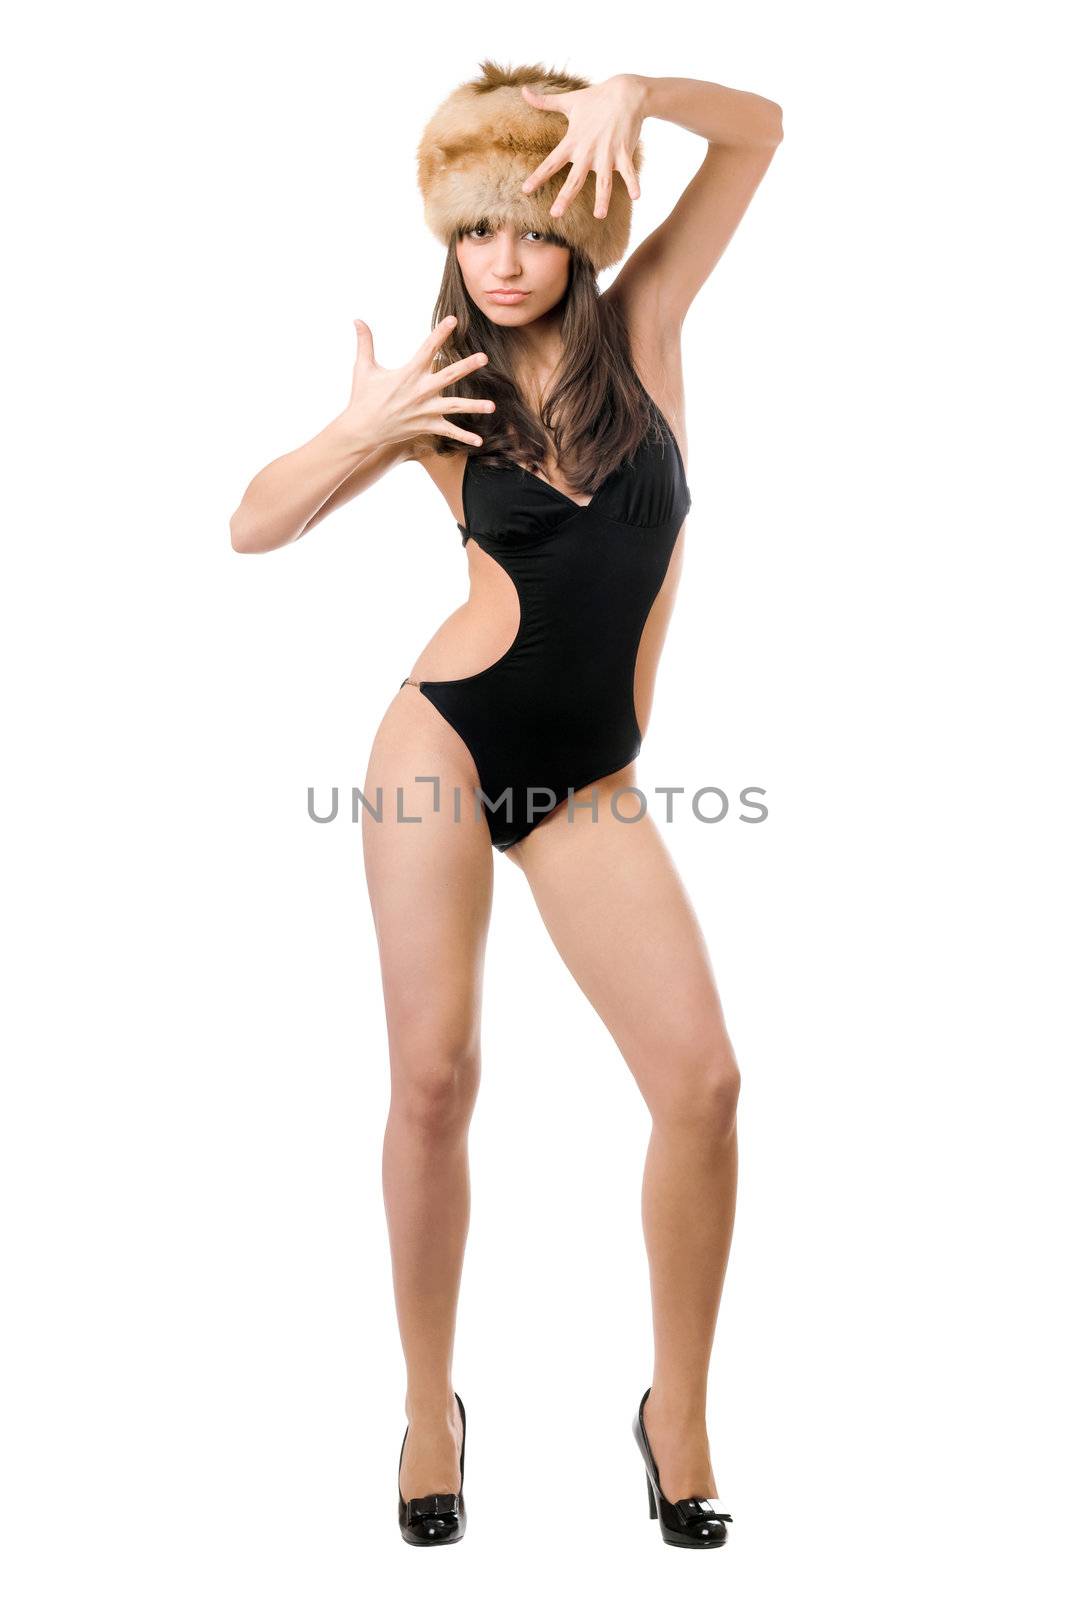 Pretty lady posing in black swimsuit and fur-cap. Isolated on white